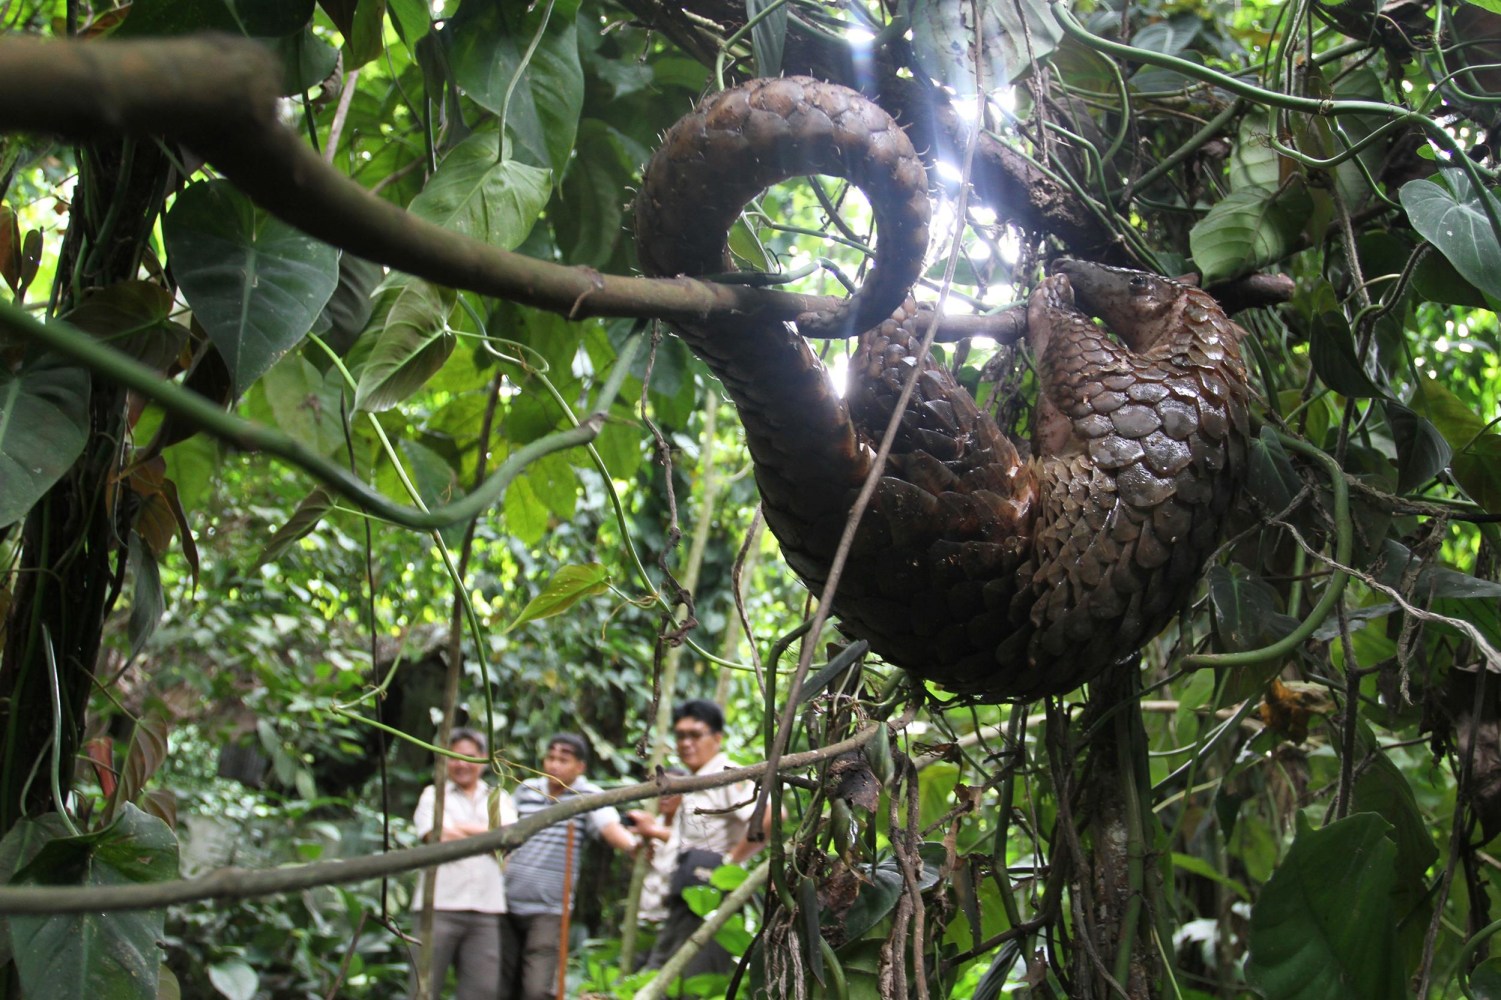 Delicious? Rich Chinese Diners Push Exotic Pangolin Toward Extinction - NBC News